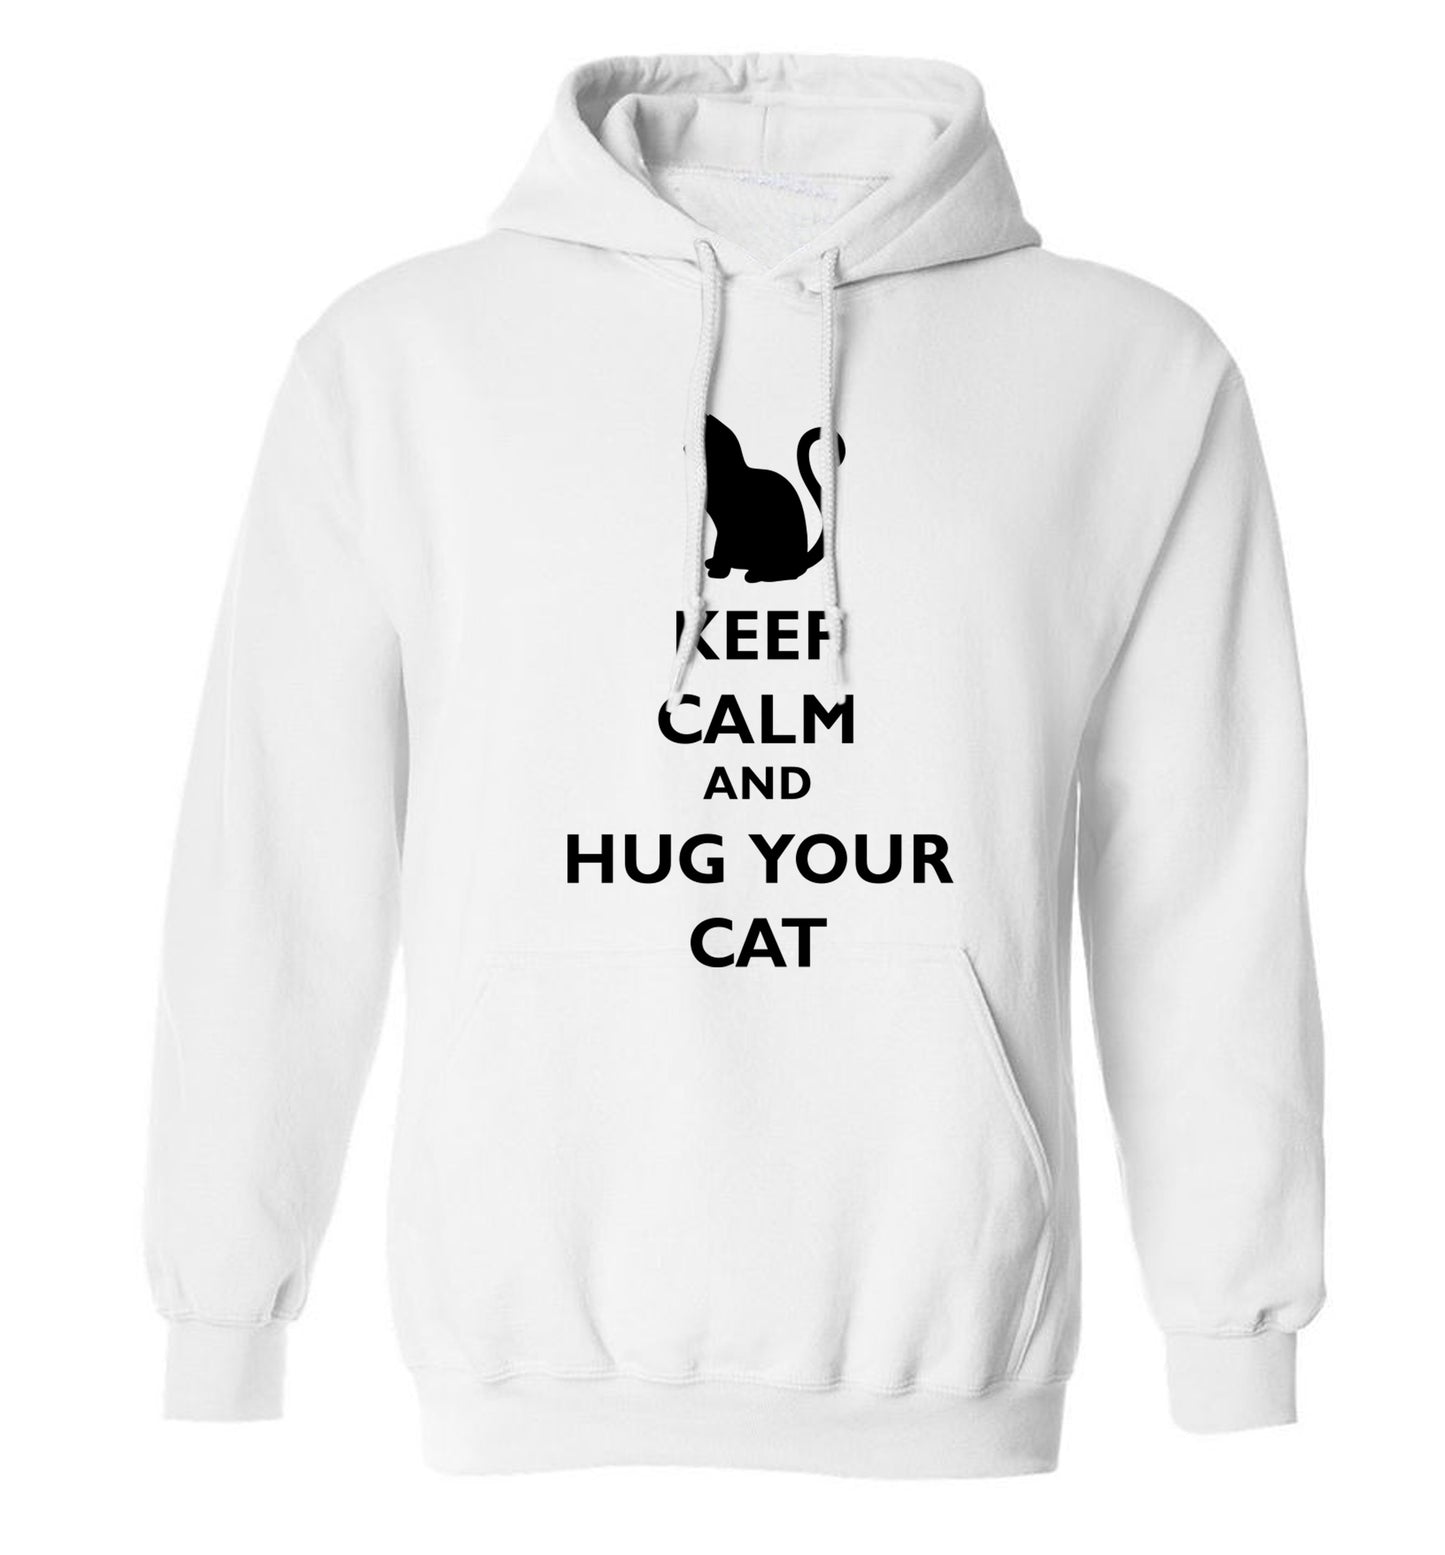 Keep calm and hug your cat adults unisex white hoodie 2XL